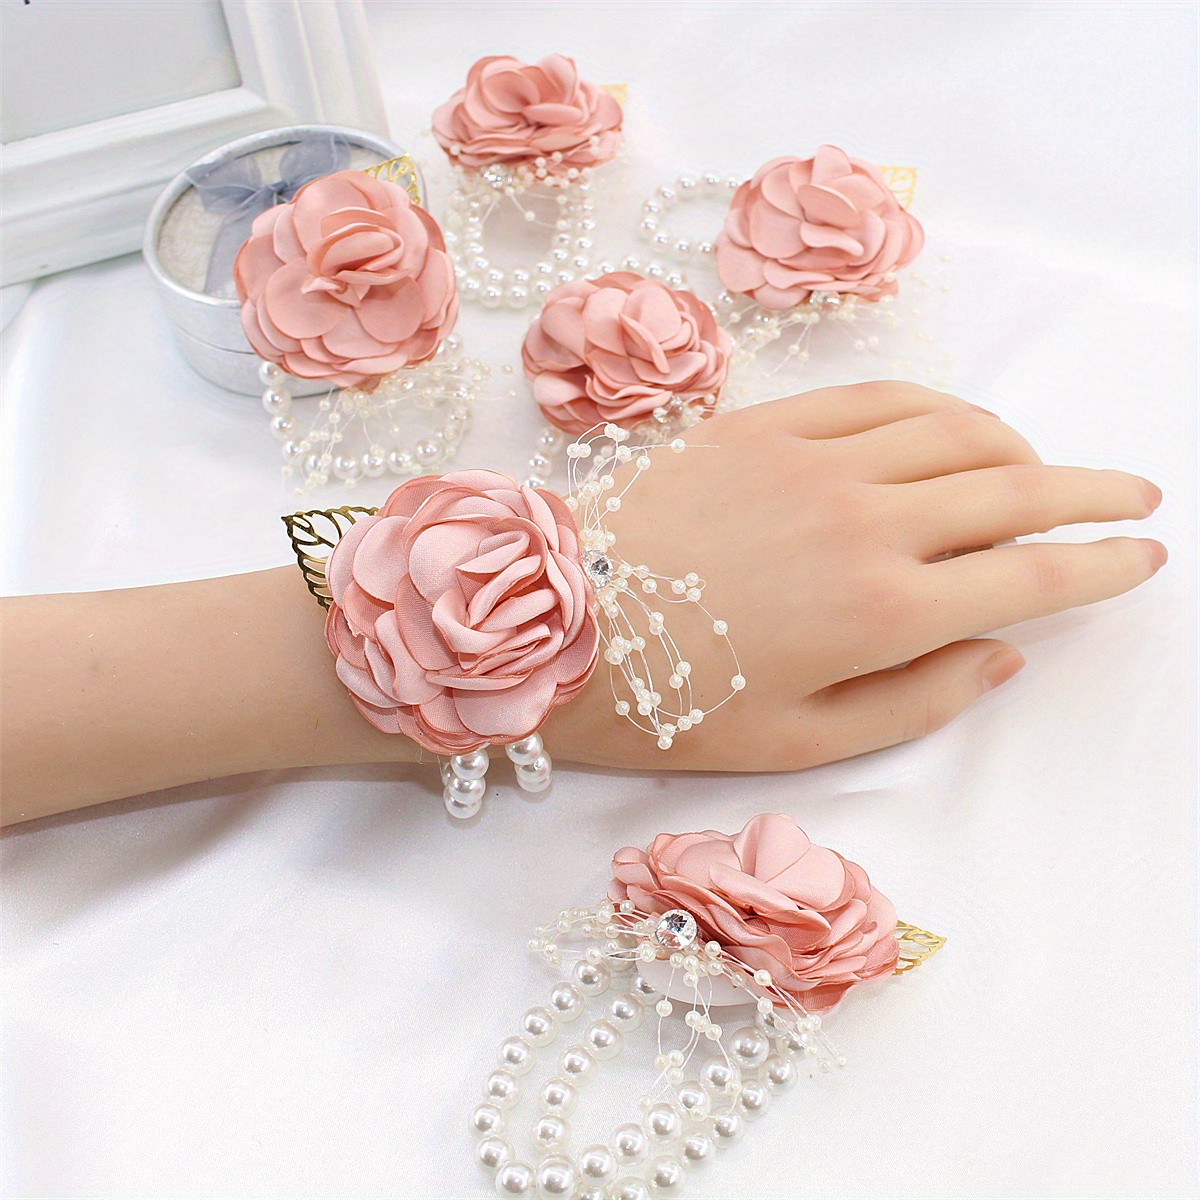 Rose Corsage Bracelet, Wedding Wrist Corsage With Rhinestone And Pearl  Flowers Decor (pink)(t-0-g)